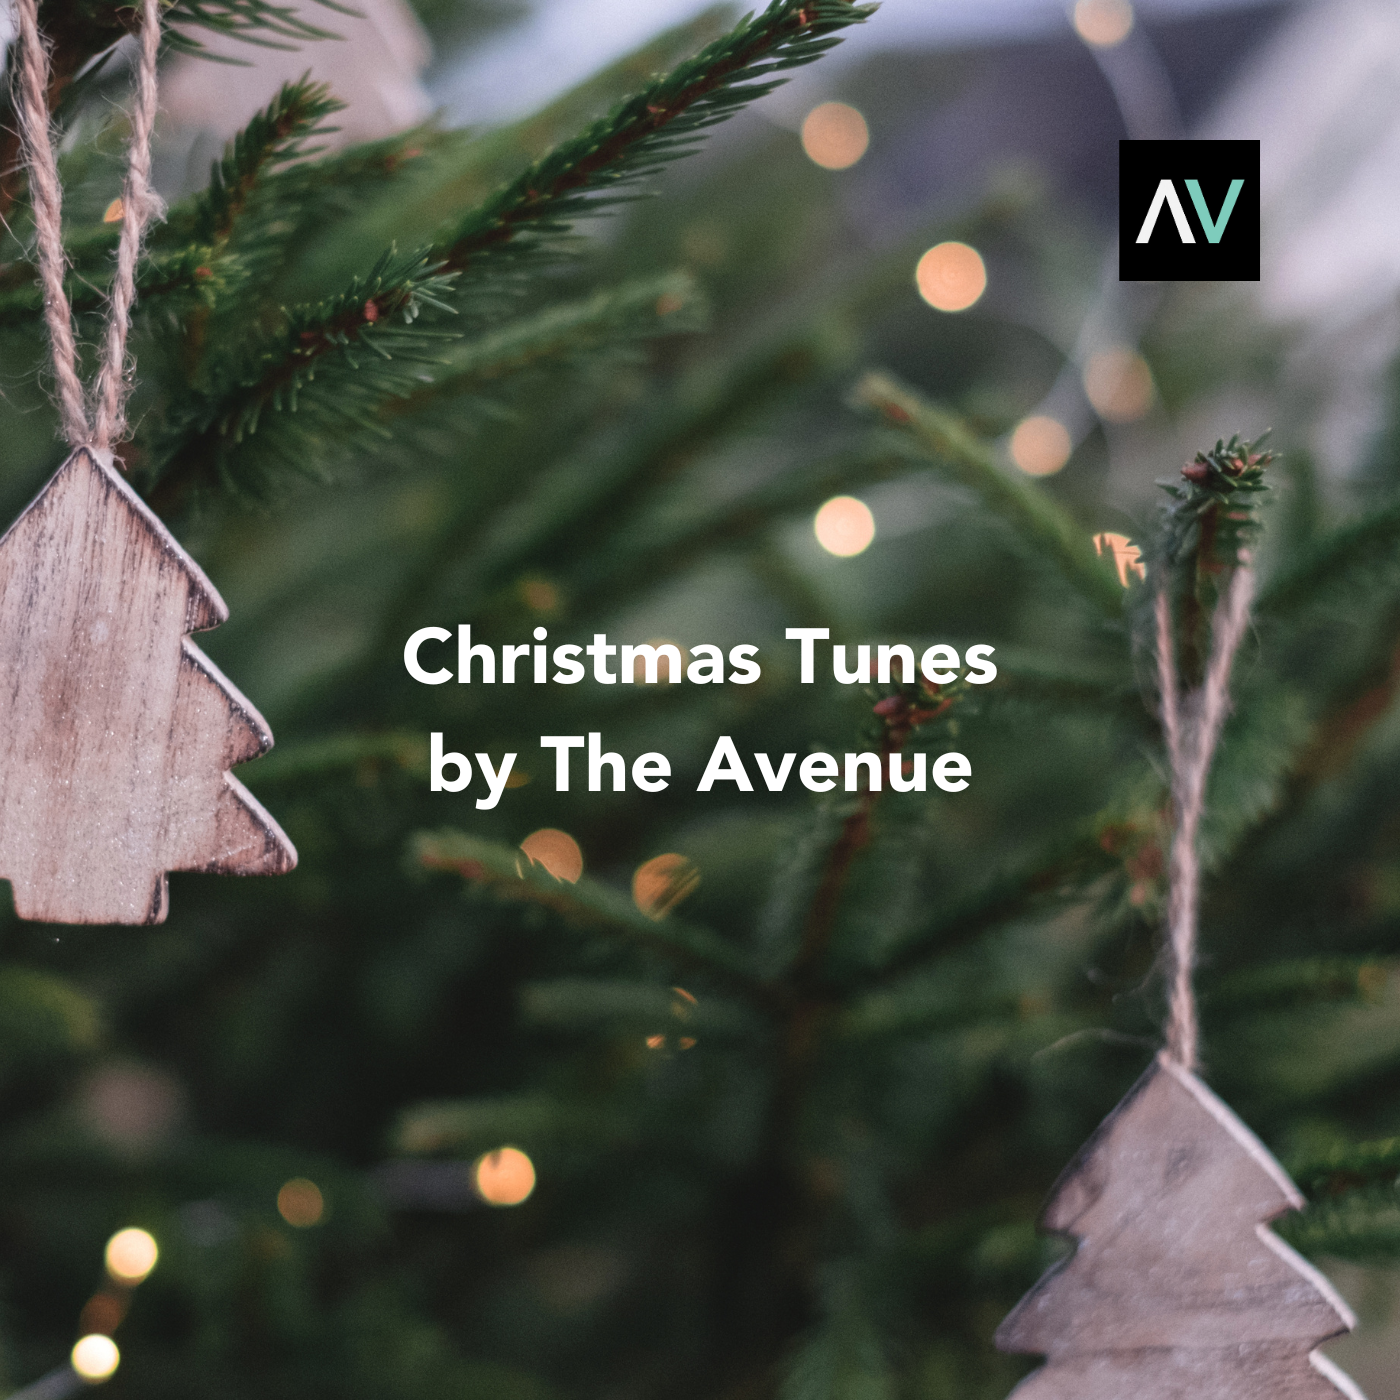 Do you need some help getting into the festive spirit? Listen along to our seasonal playlist now!